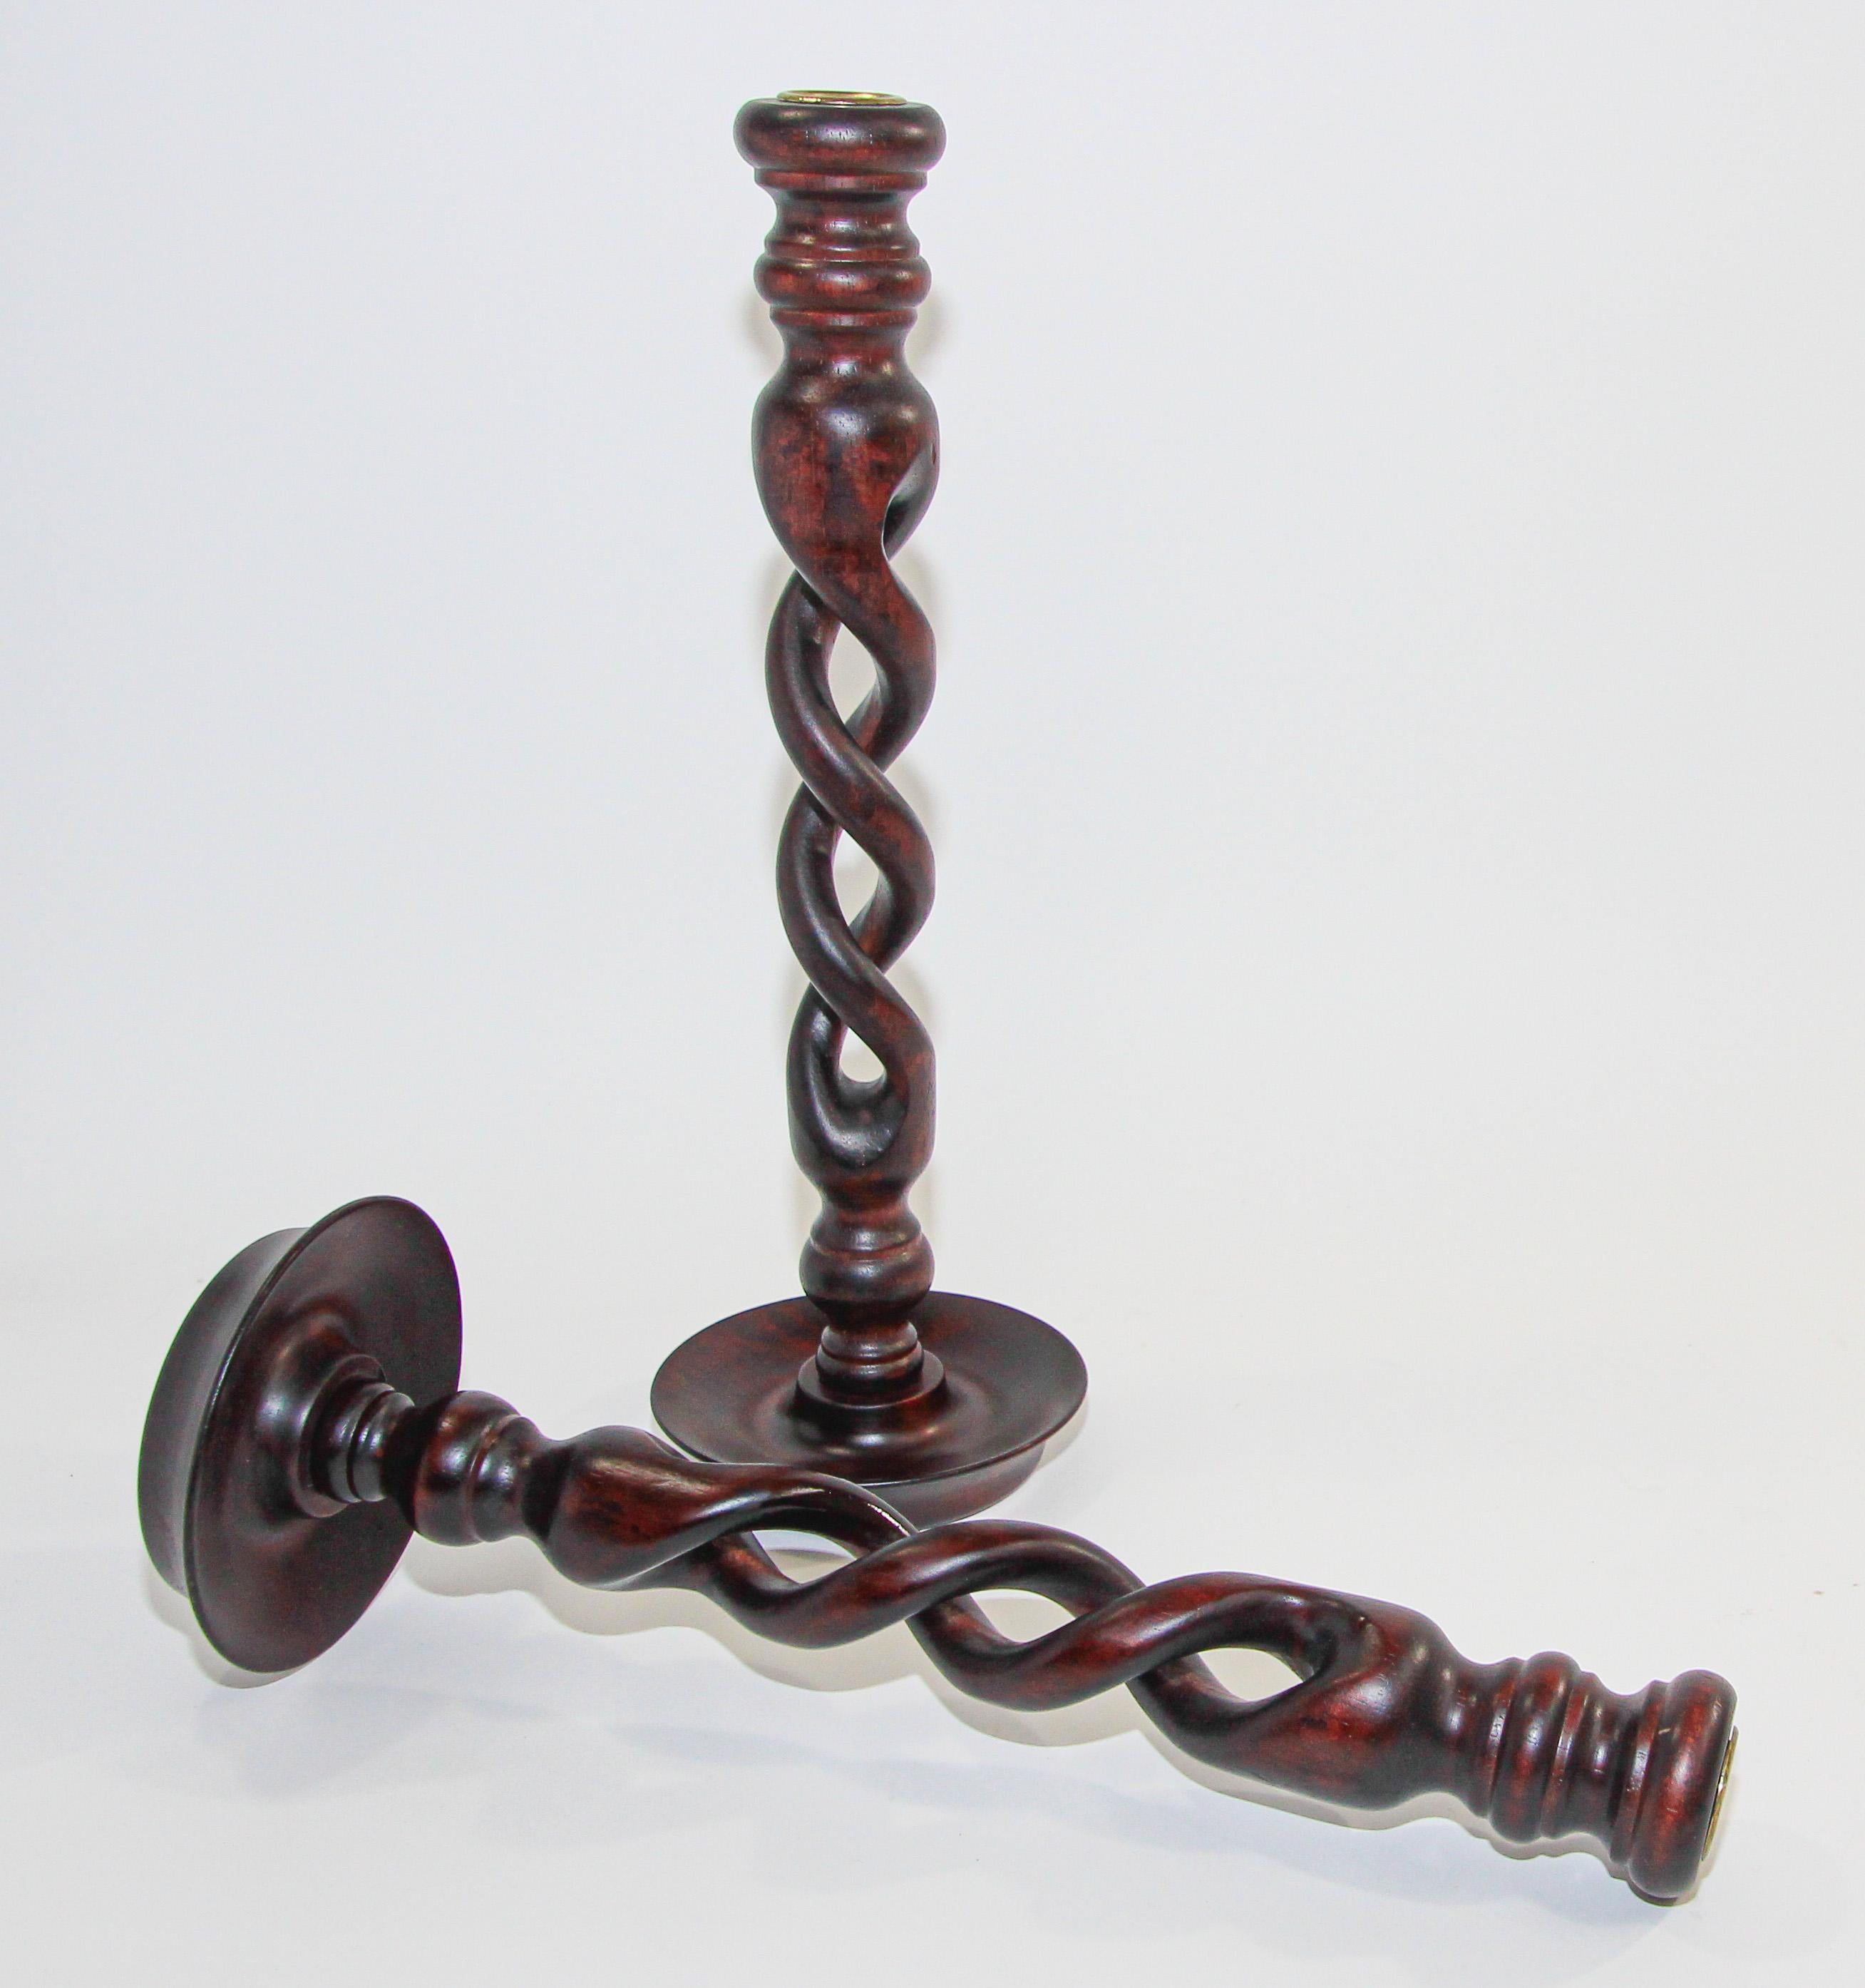 Hand-Crafted Open Barley Twist Wooden English Candlesticks a Pair